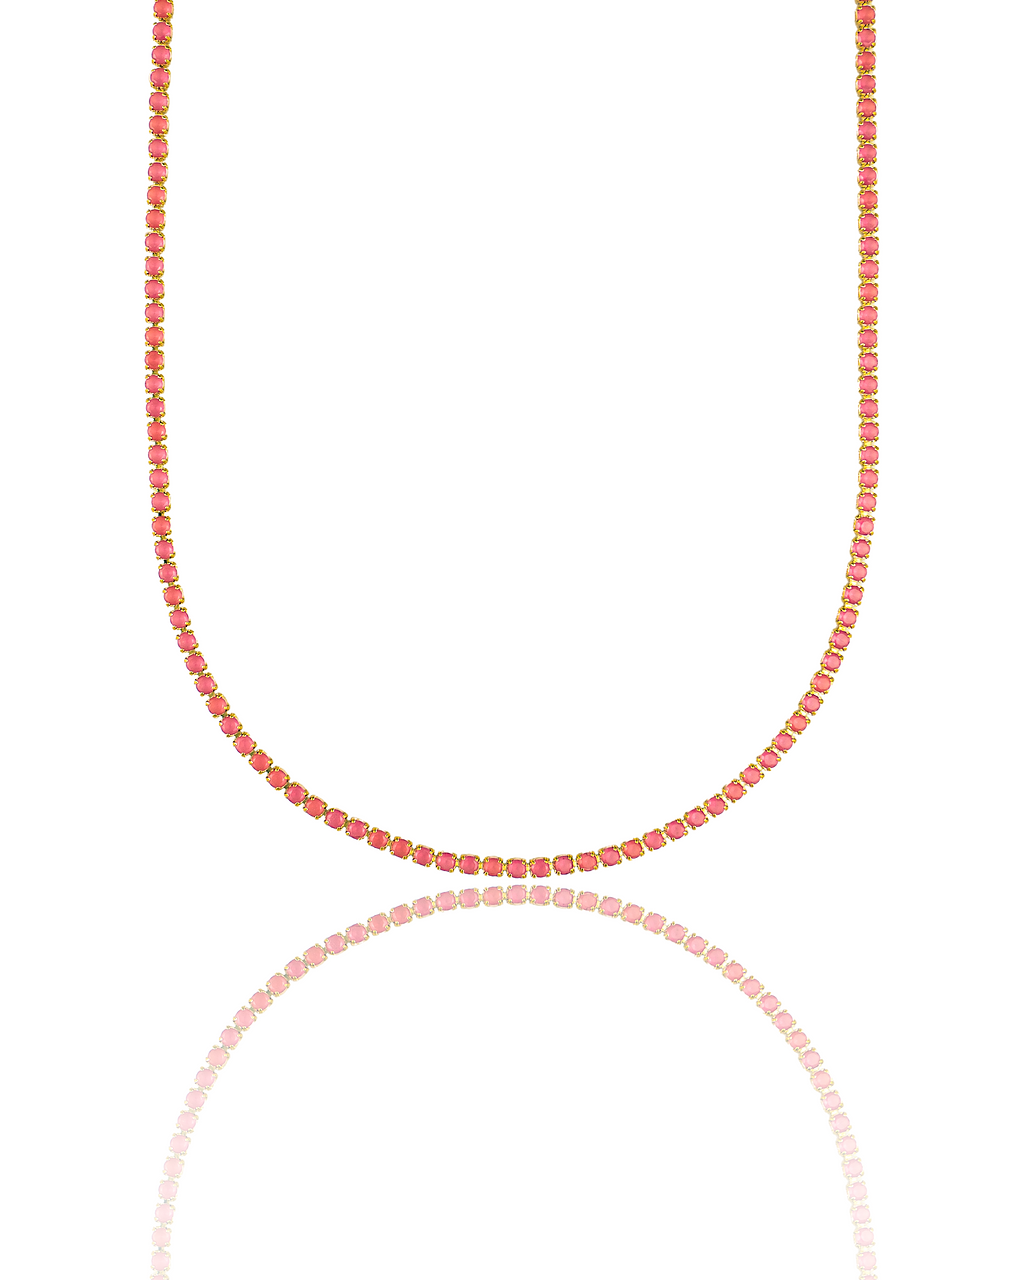 11 Different Colors 2mm Tennis Choker With Round Cubic Zirconia Stones (F210)